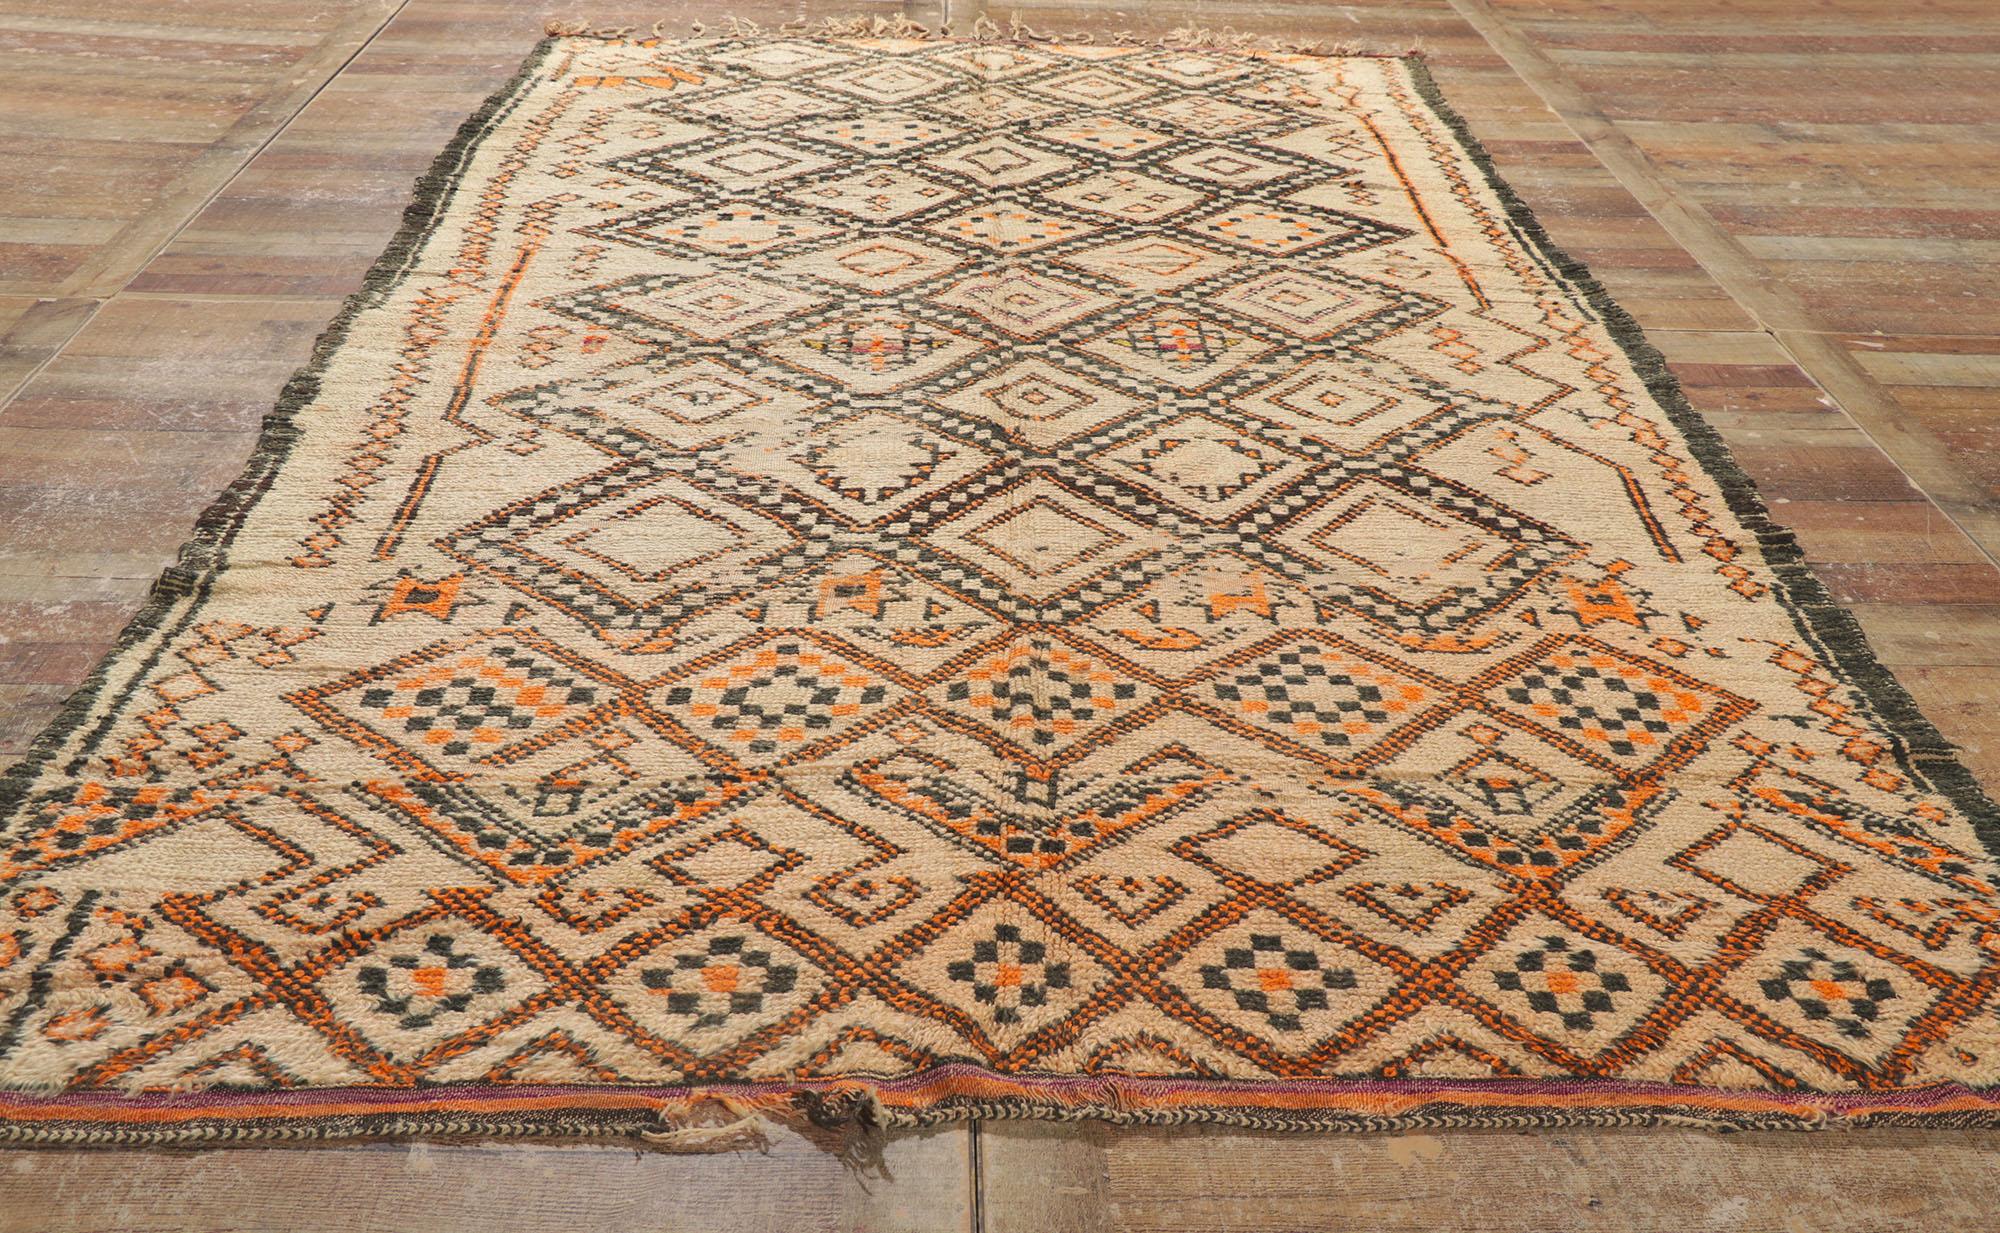 Vintage Moroccan Beni Ourain Rug, Rustic Sensibility Meets Nomadic Charm For Sale 1